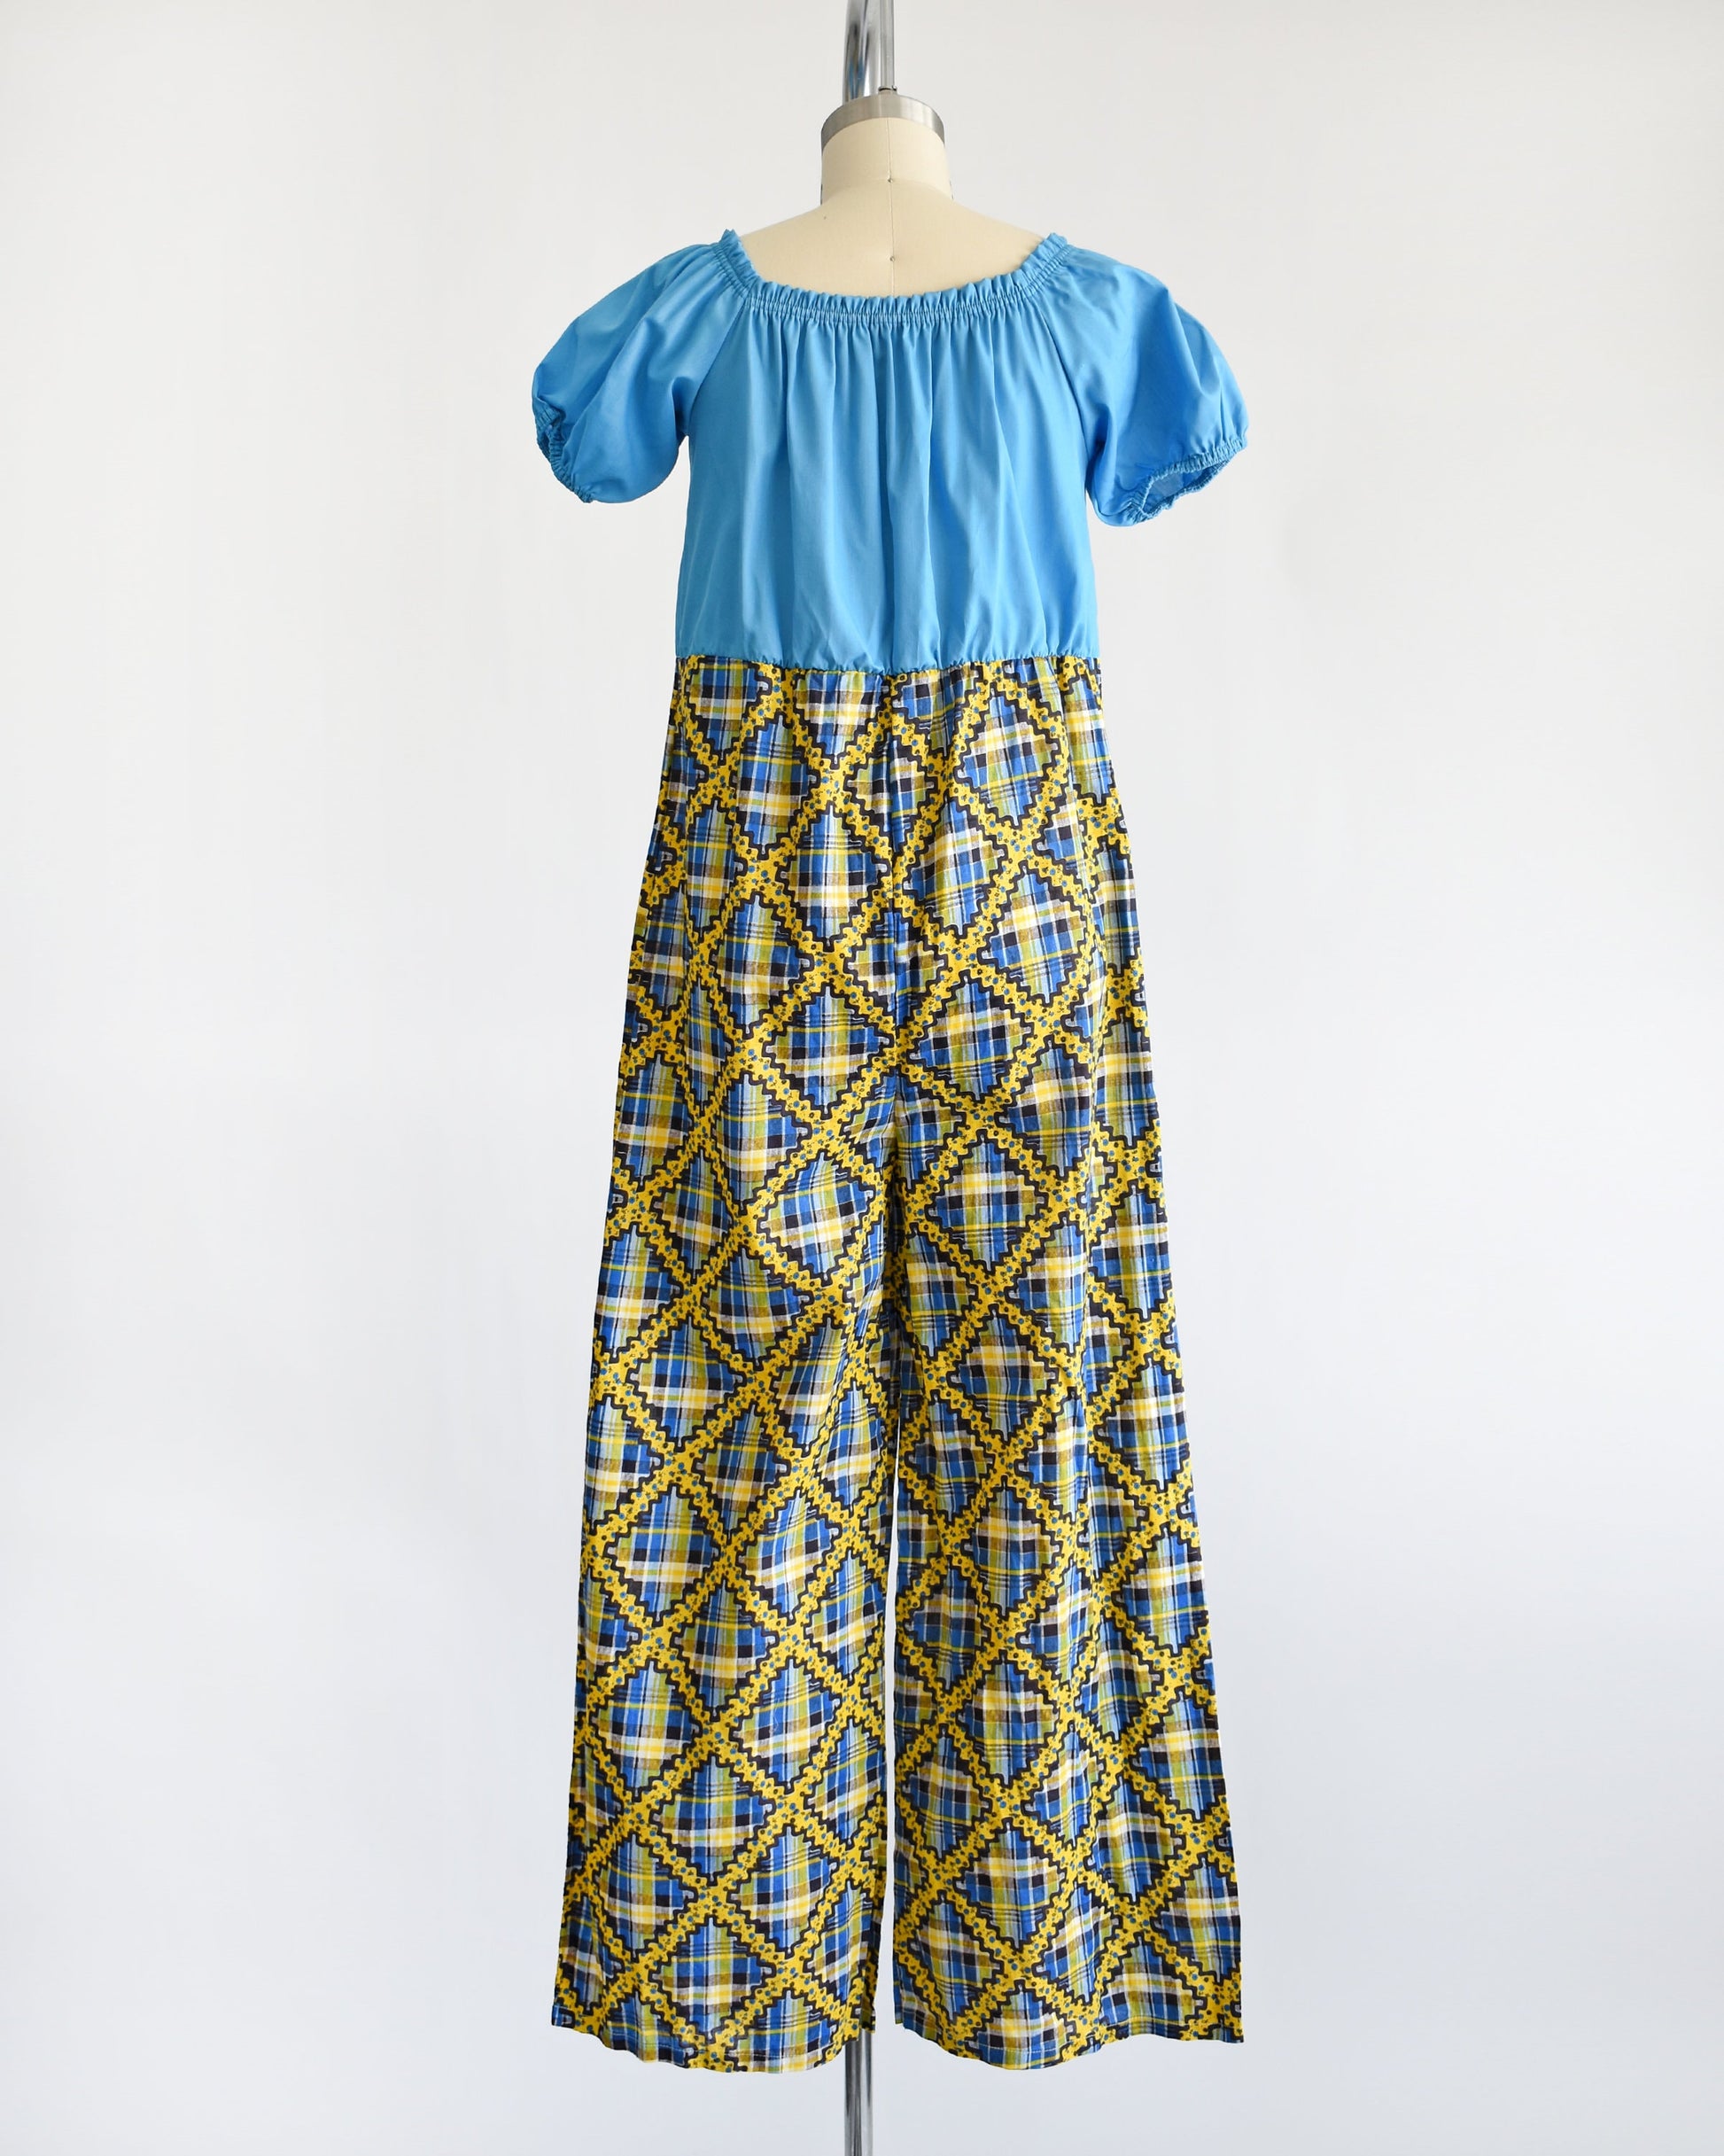 Back view of a vintage 70s jumpsuit that has a blue bodice with smocked elastic neckline and puff sleeves. The pants are a blue, black, and yellow plaid, with a ric-rac dotted yellow and black print on top of the plaid.